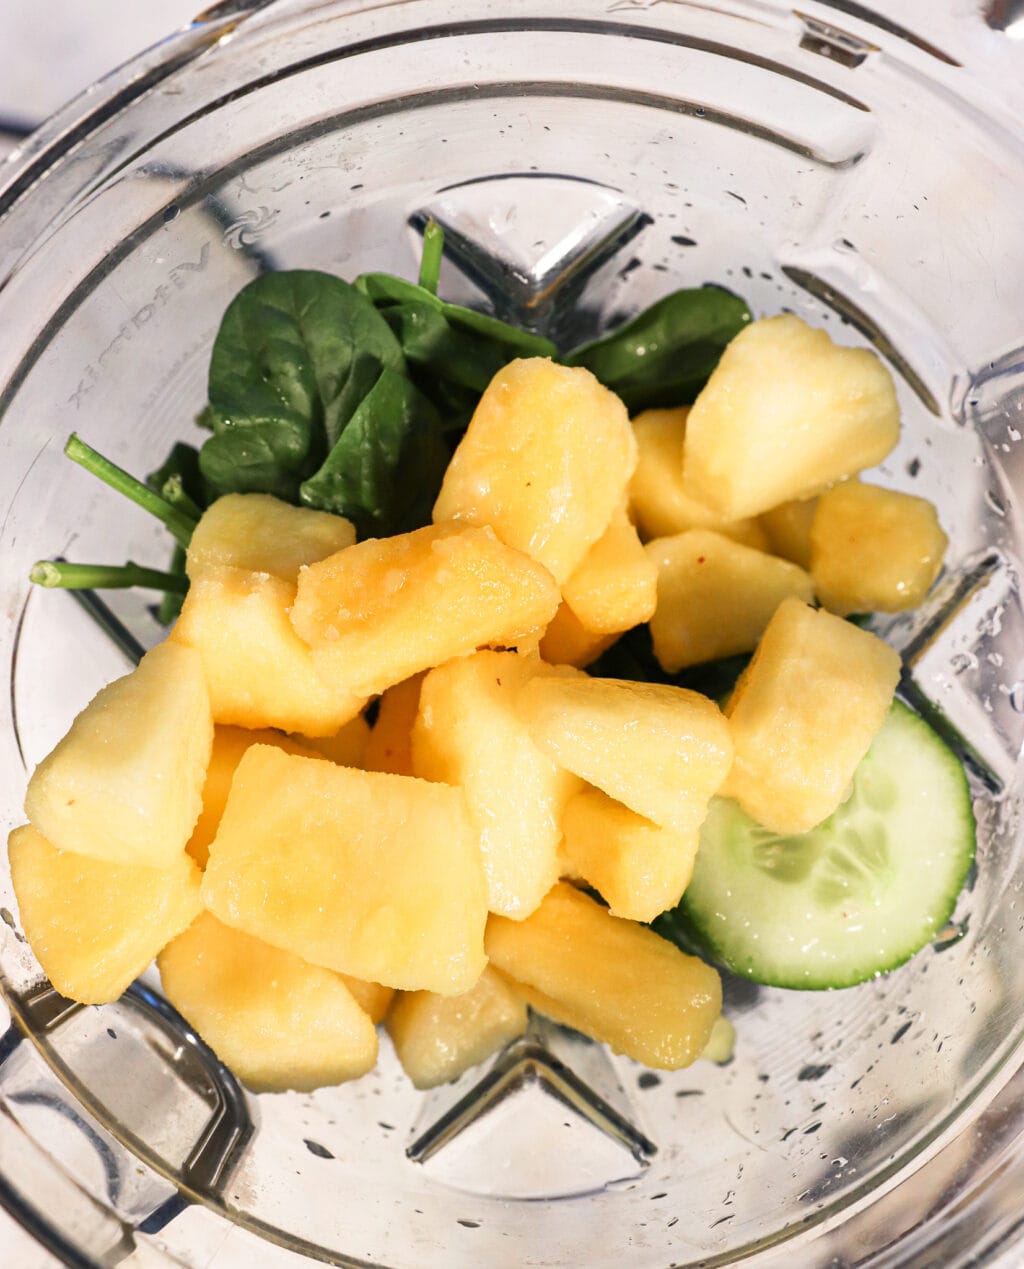 Ingredients for Blender Juice With Spinach, Pineapple & Cucumber, including lemon juice, cucumber, spinach, pineapple, and water in a blender.